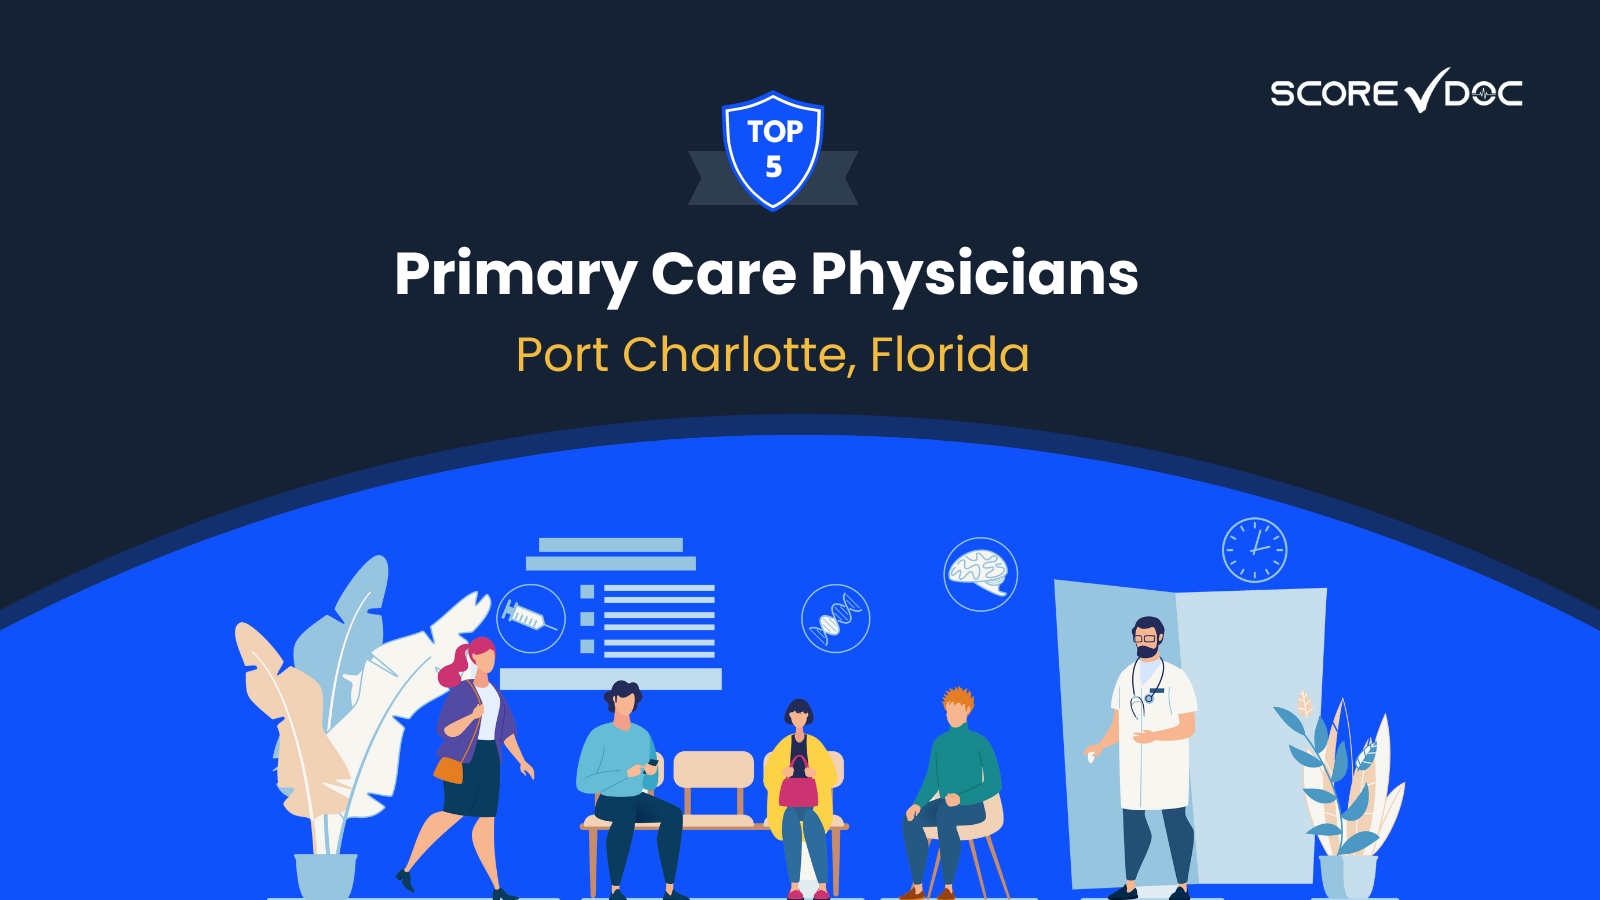 5 Top Rated Primary Care Physicians in Port Charlotte, Florida